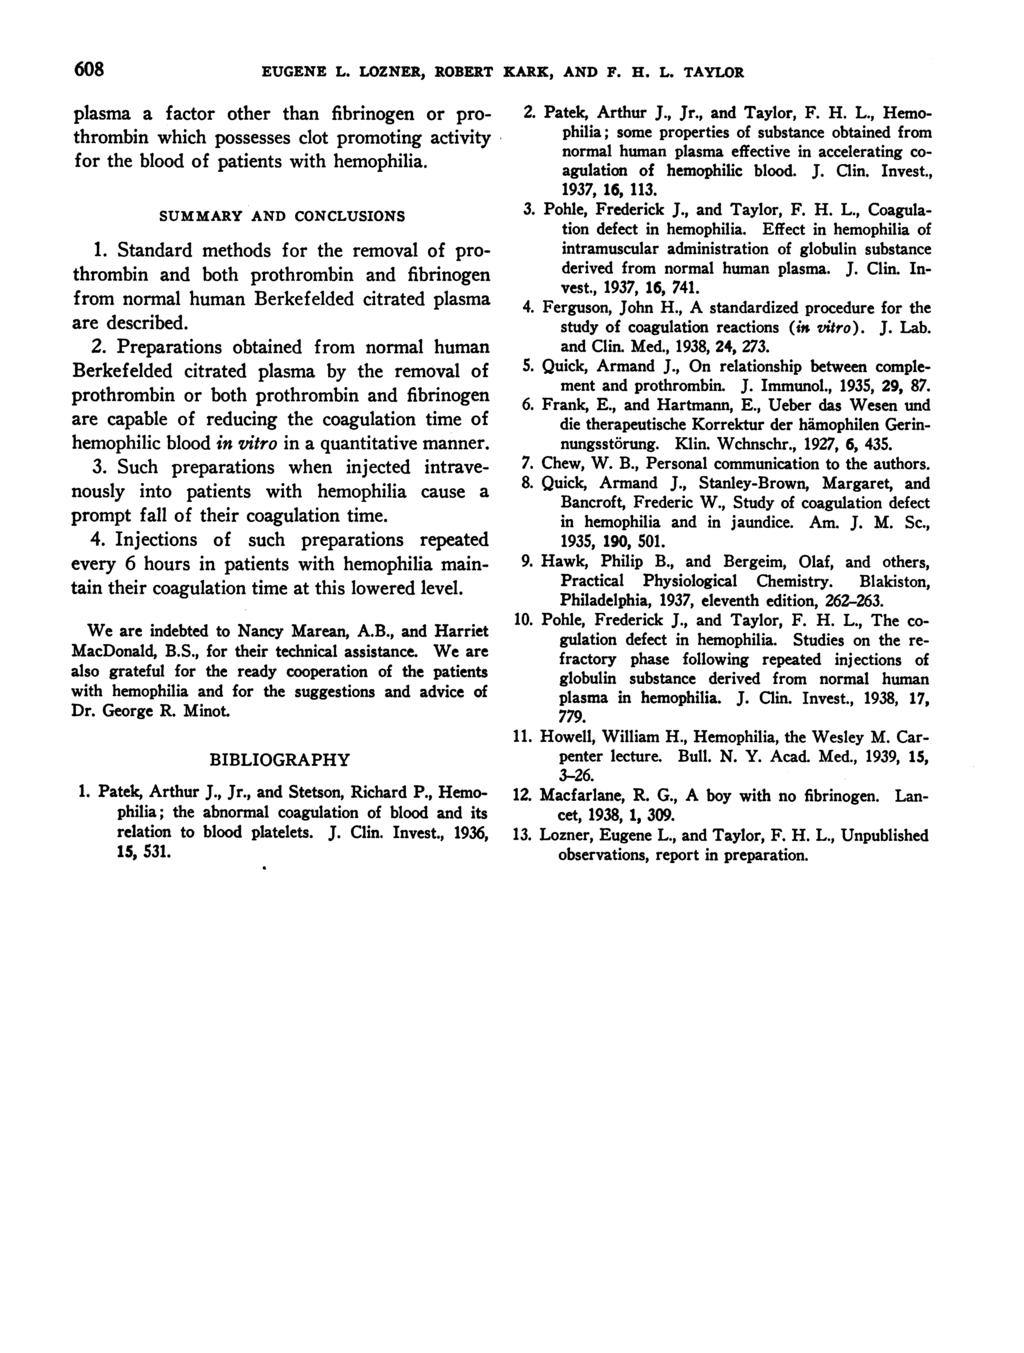 68 EUGENE L. LOZNER, ROBERT KARK, AND F. H. L. TAYLOR plasma a factor other than fibrinogen or prothrombin which possesses clot promoting activity for the blood of patients with hemophilia.